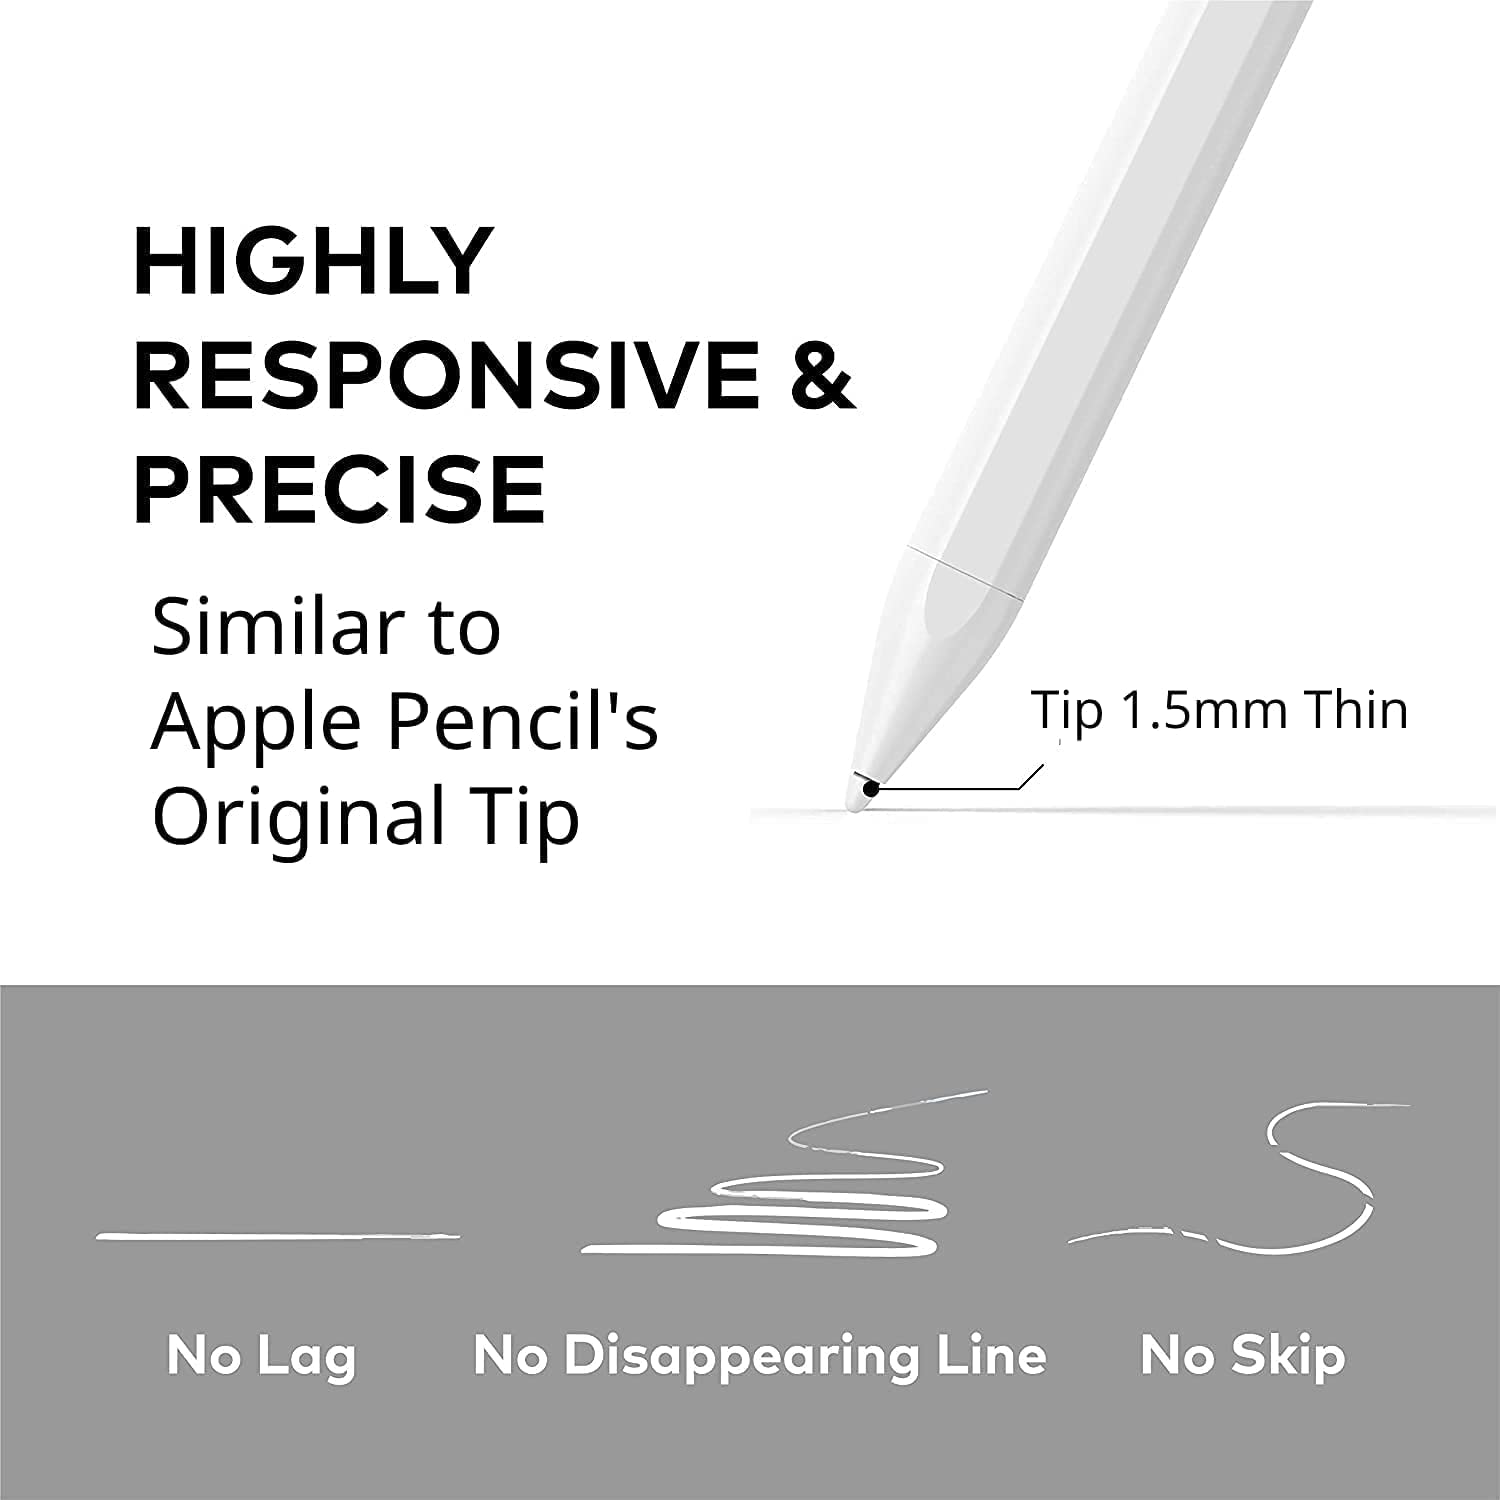 SWITCHEASY Stylus Pen for iPad - EasyPencil Pro 3 iPad Drawing Pen with Palm Rejection, Compatible with 2018-2021 iPad Pro, iPad 6/7/8/9, iPad Mini 5/6, iPad Air 3rd/4th Gen for Writing & Drawing